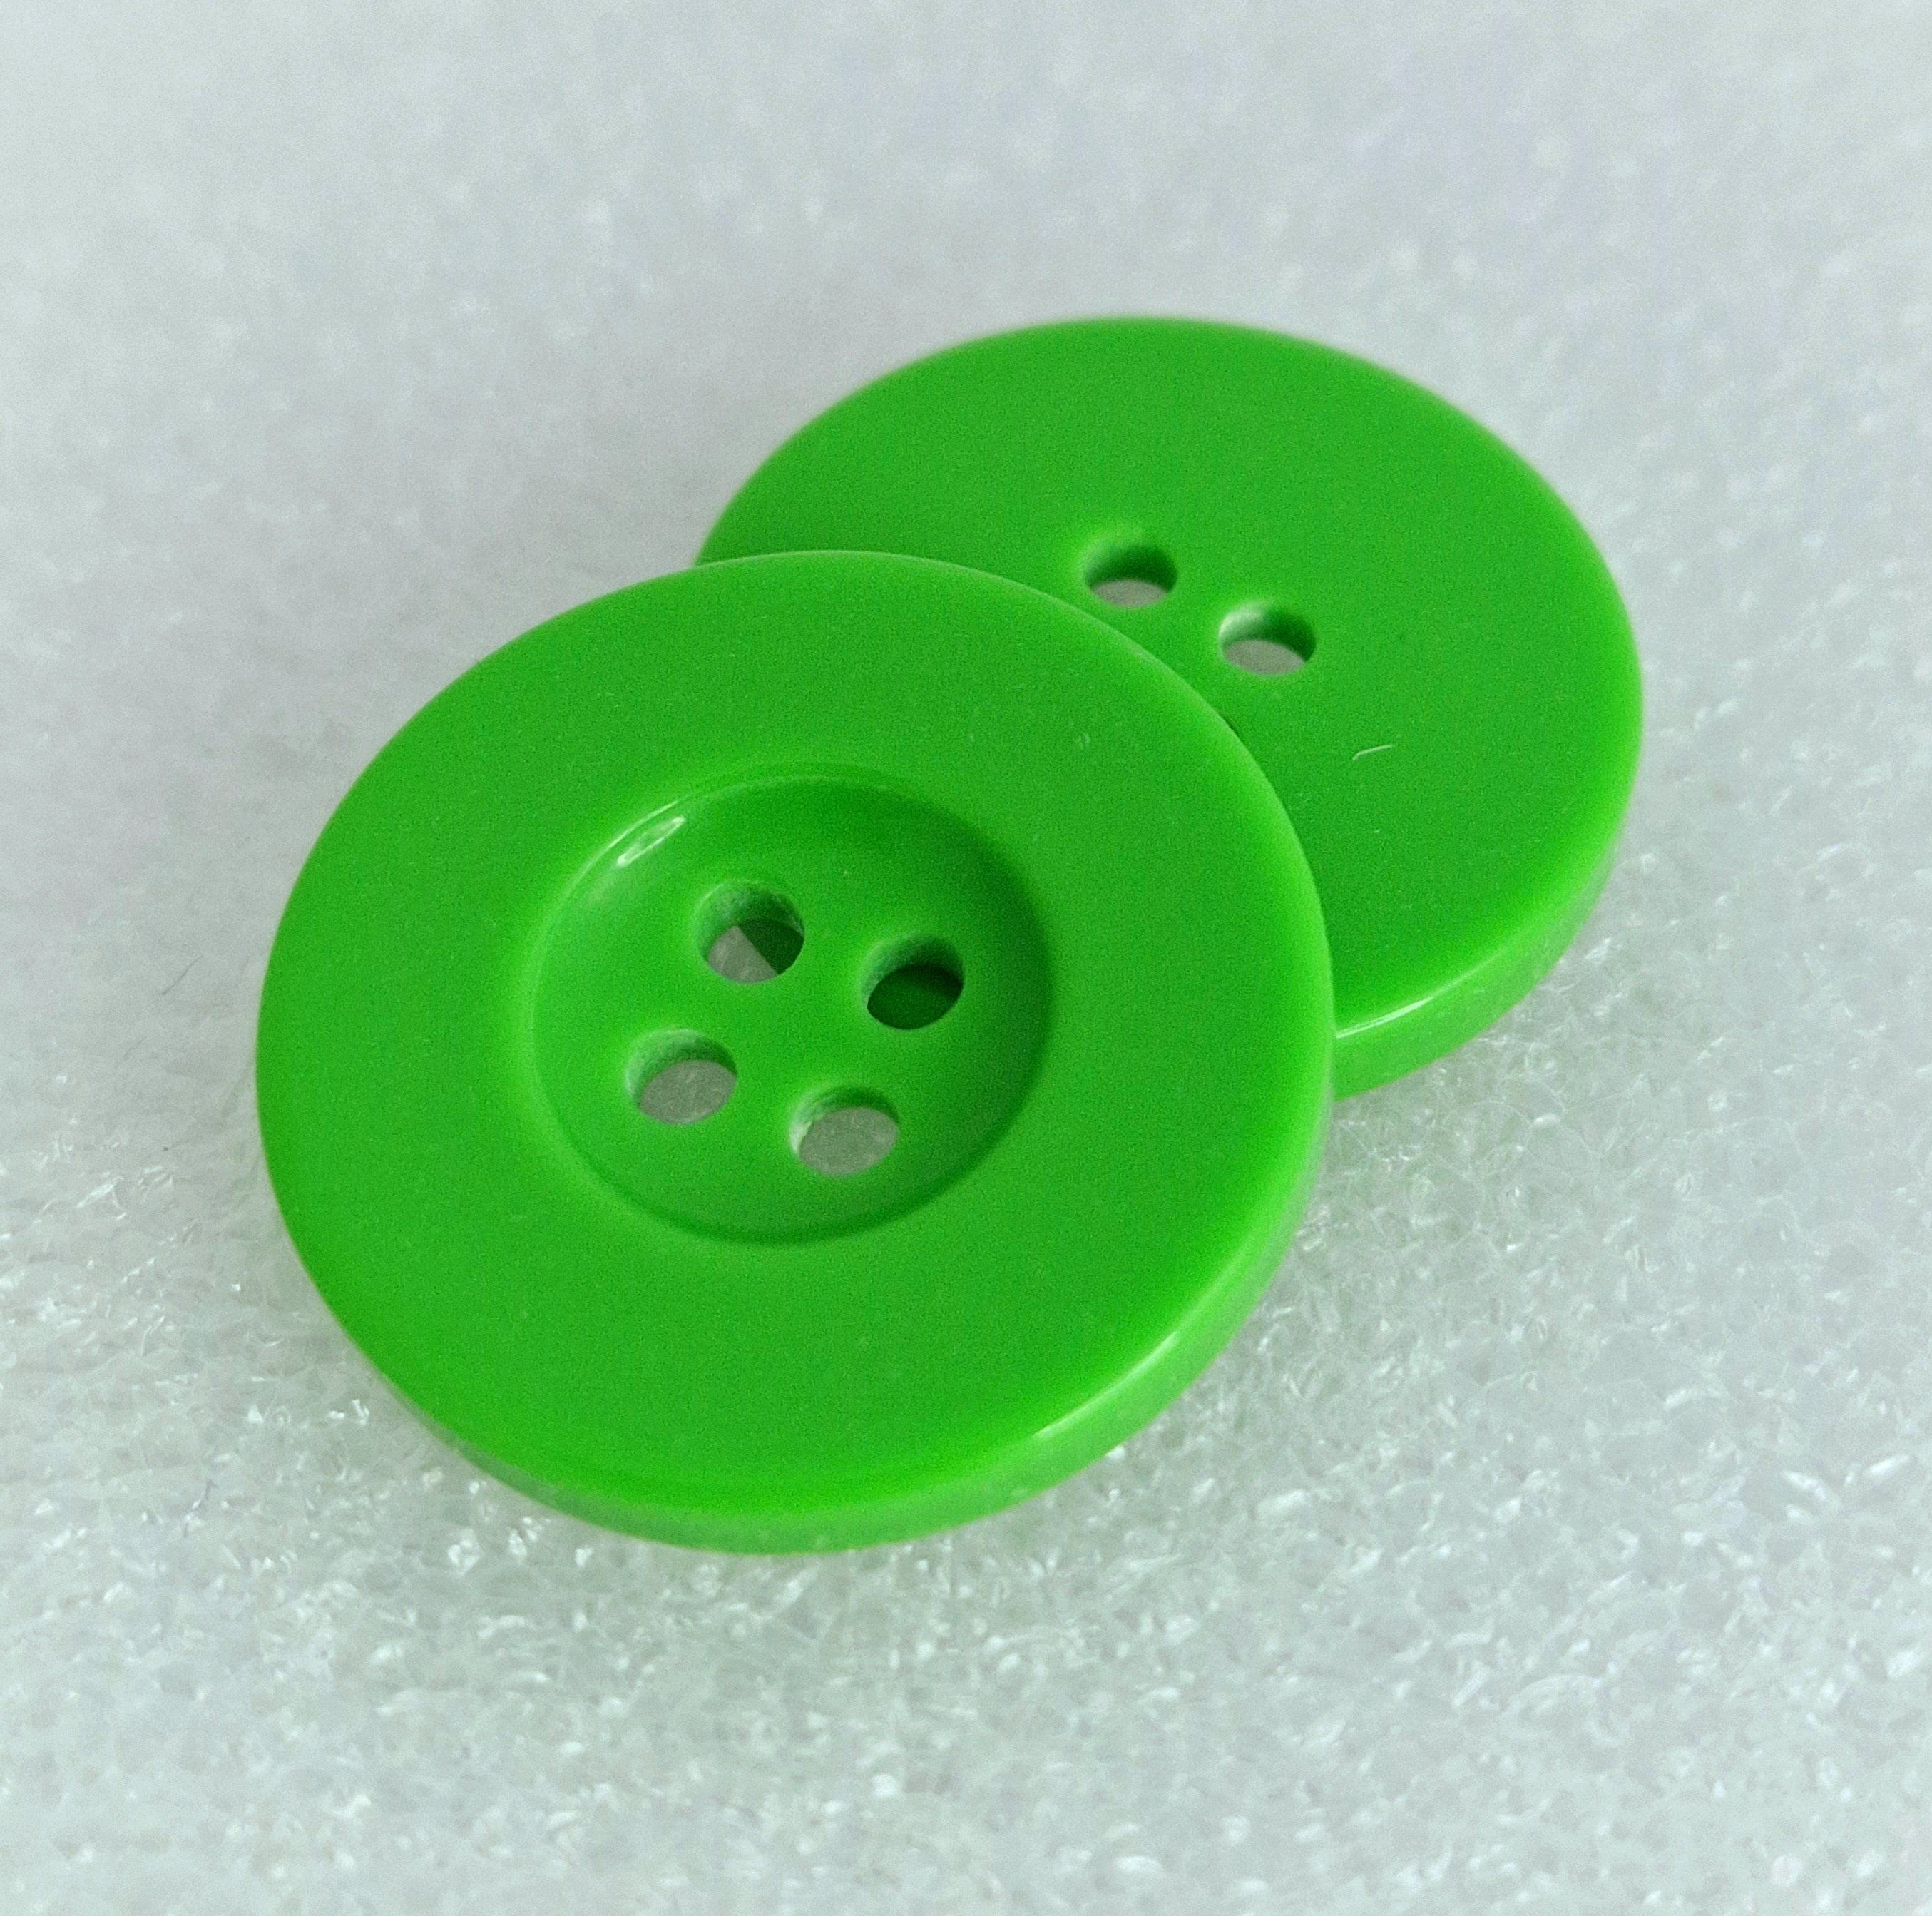 MajorCrafts 16pcs 25mm Bright Green 4 Holes Round Resin Sewing Buttons